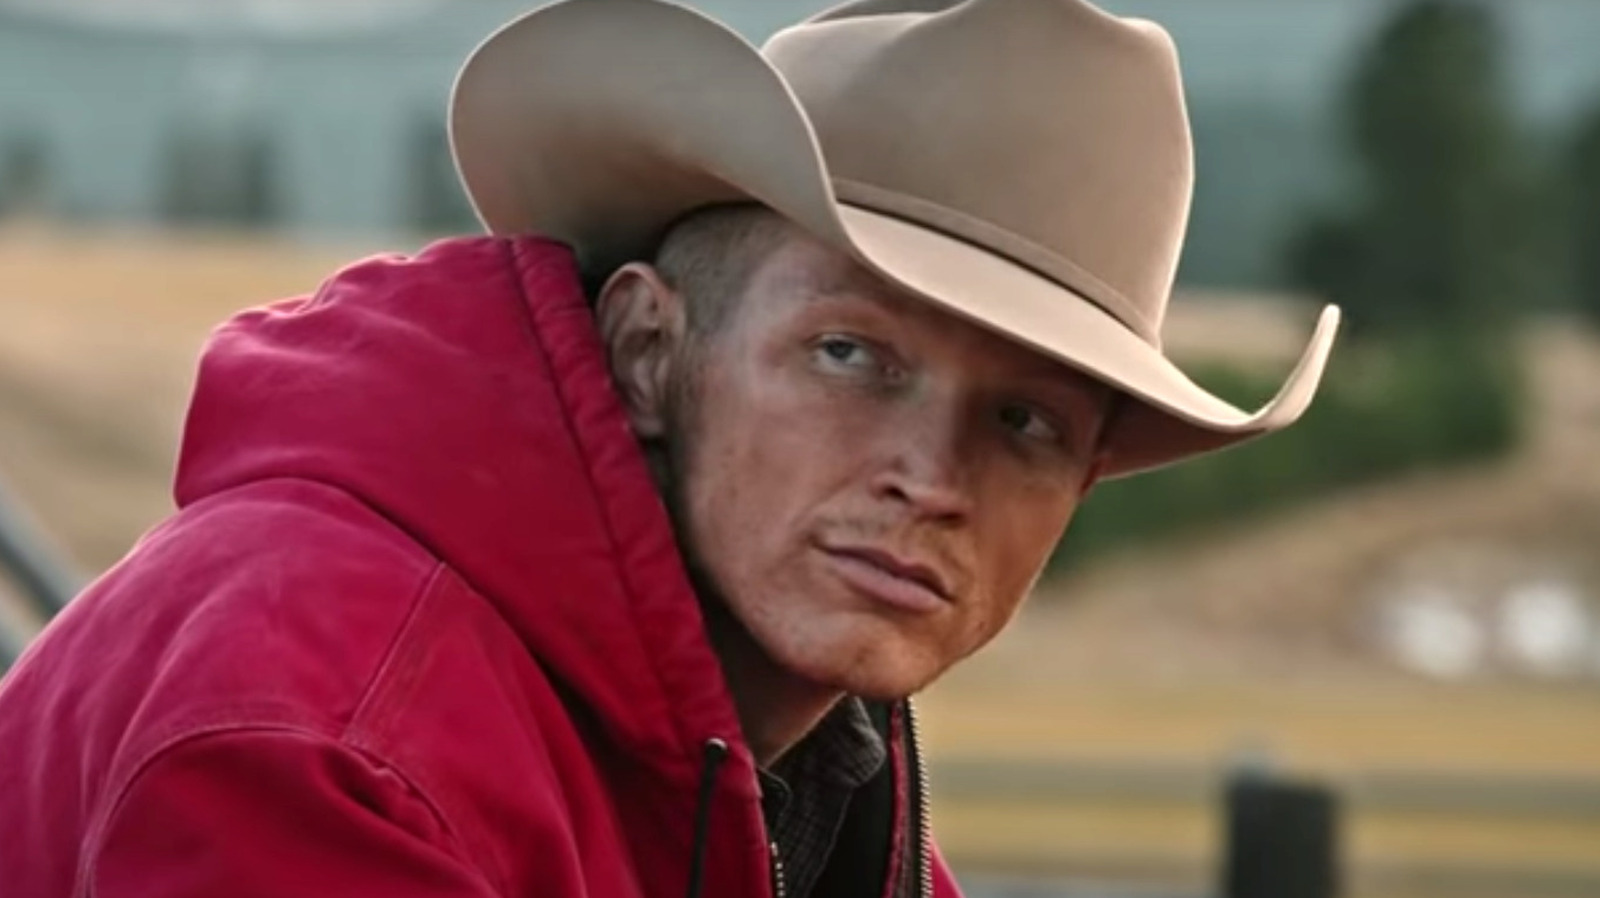 Yellowstone Fans Agree Jimmy’s Character Arc Has Been One Of The Best